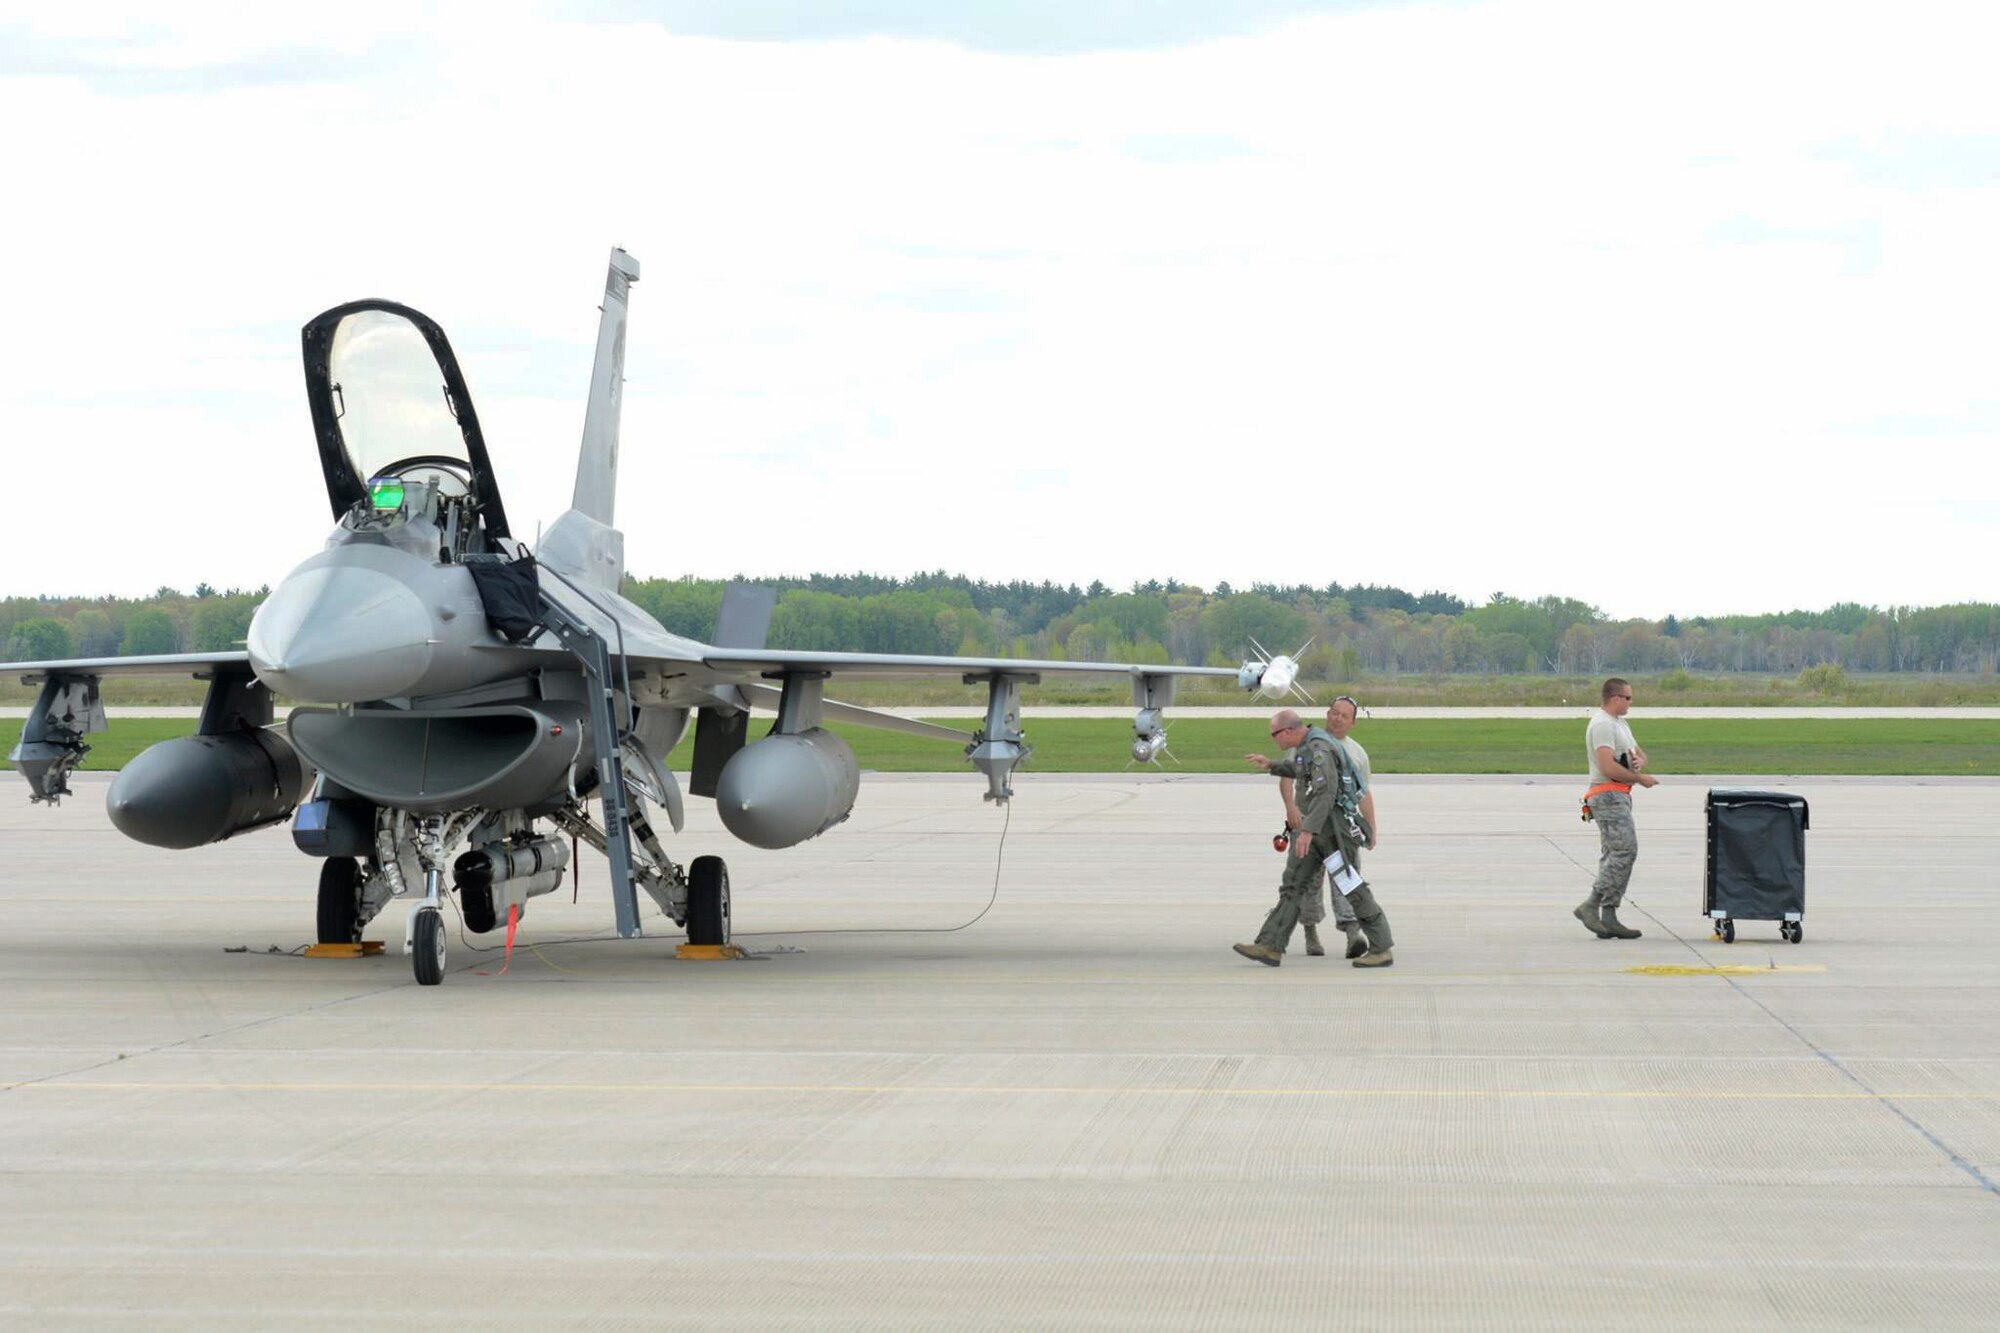 Lt. Col. Todd Sheridan, 175th Fighter Squadron pilot, performs a walk around inspection during Exercise Northern Lightning at Volk Field Combat Readiness Training Center, Camp Douglas, Wisconsin, May 1-12, 2017. Northern Lightning is an exercise involving around 1,500 service members from the Air Force, Navy, Marines and National Guard across the country. (U.S. Air National Guard photo by Staff Sgt. Andrea F. Rhode/Released)